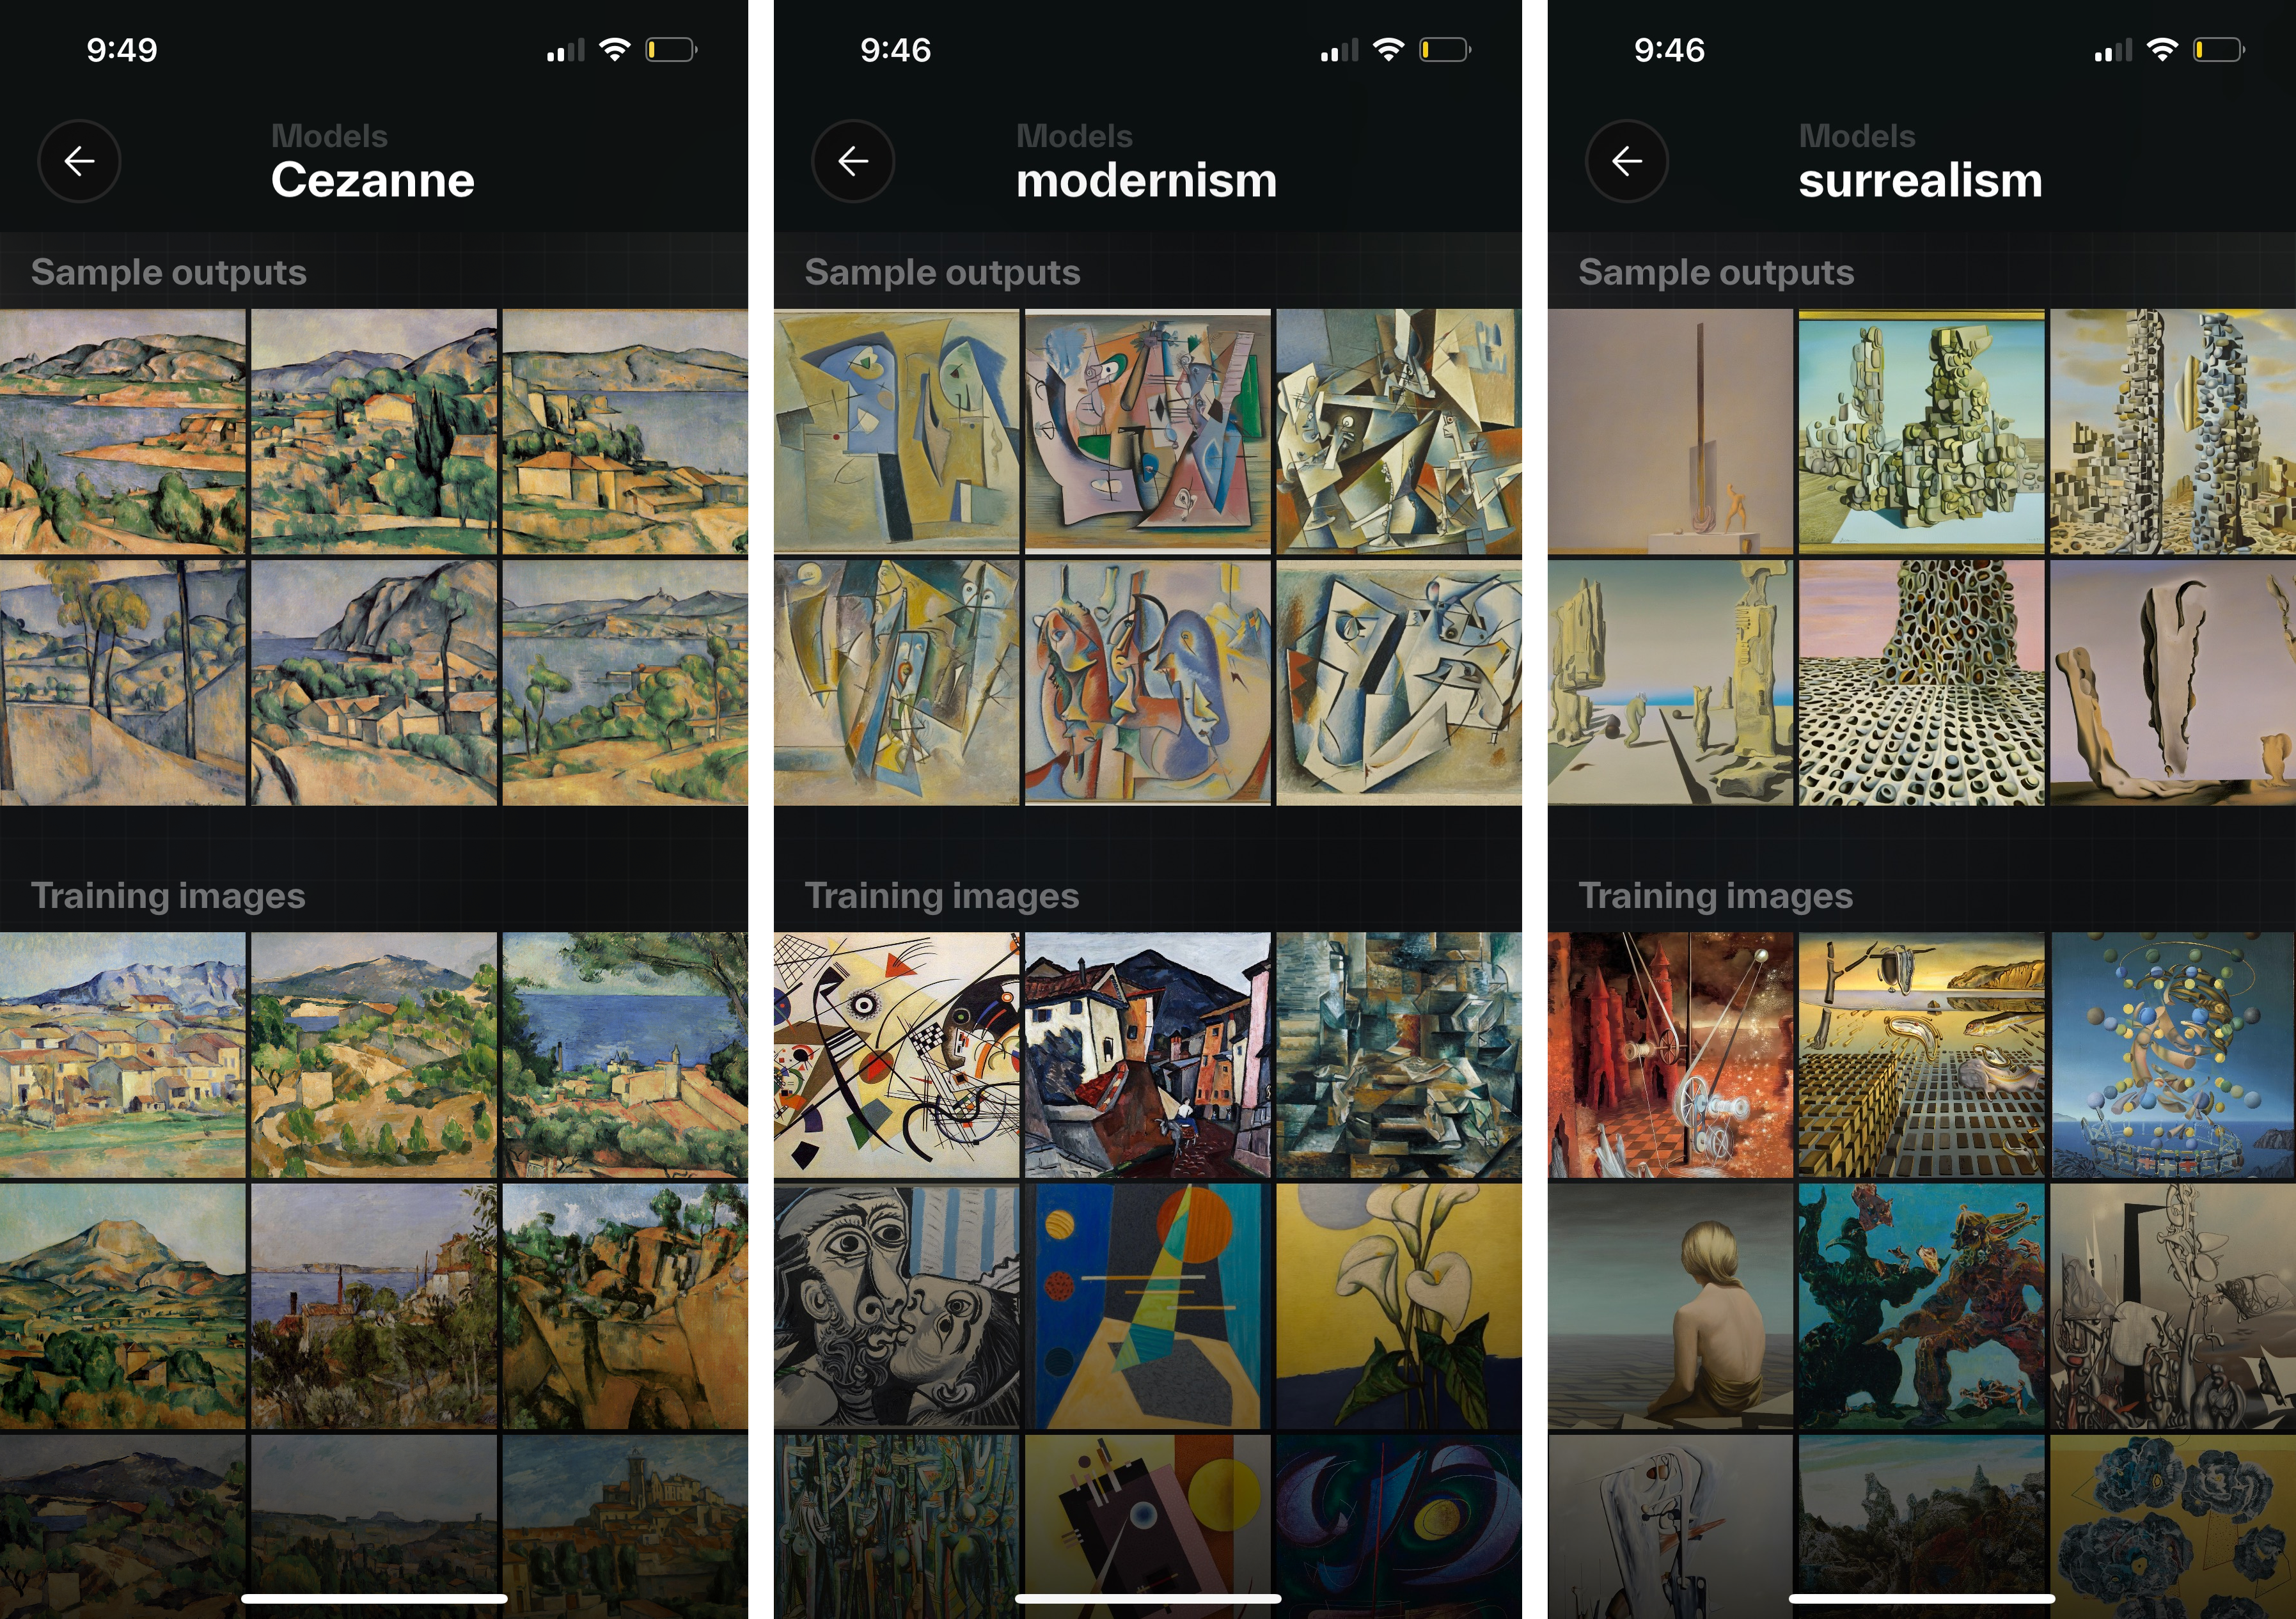 Wand.app raises $4.2M to scale its AI-powered creative tool for artists 2